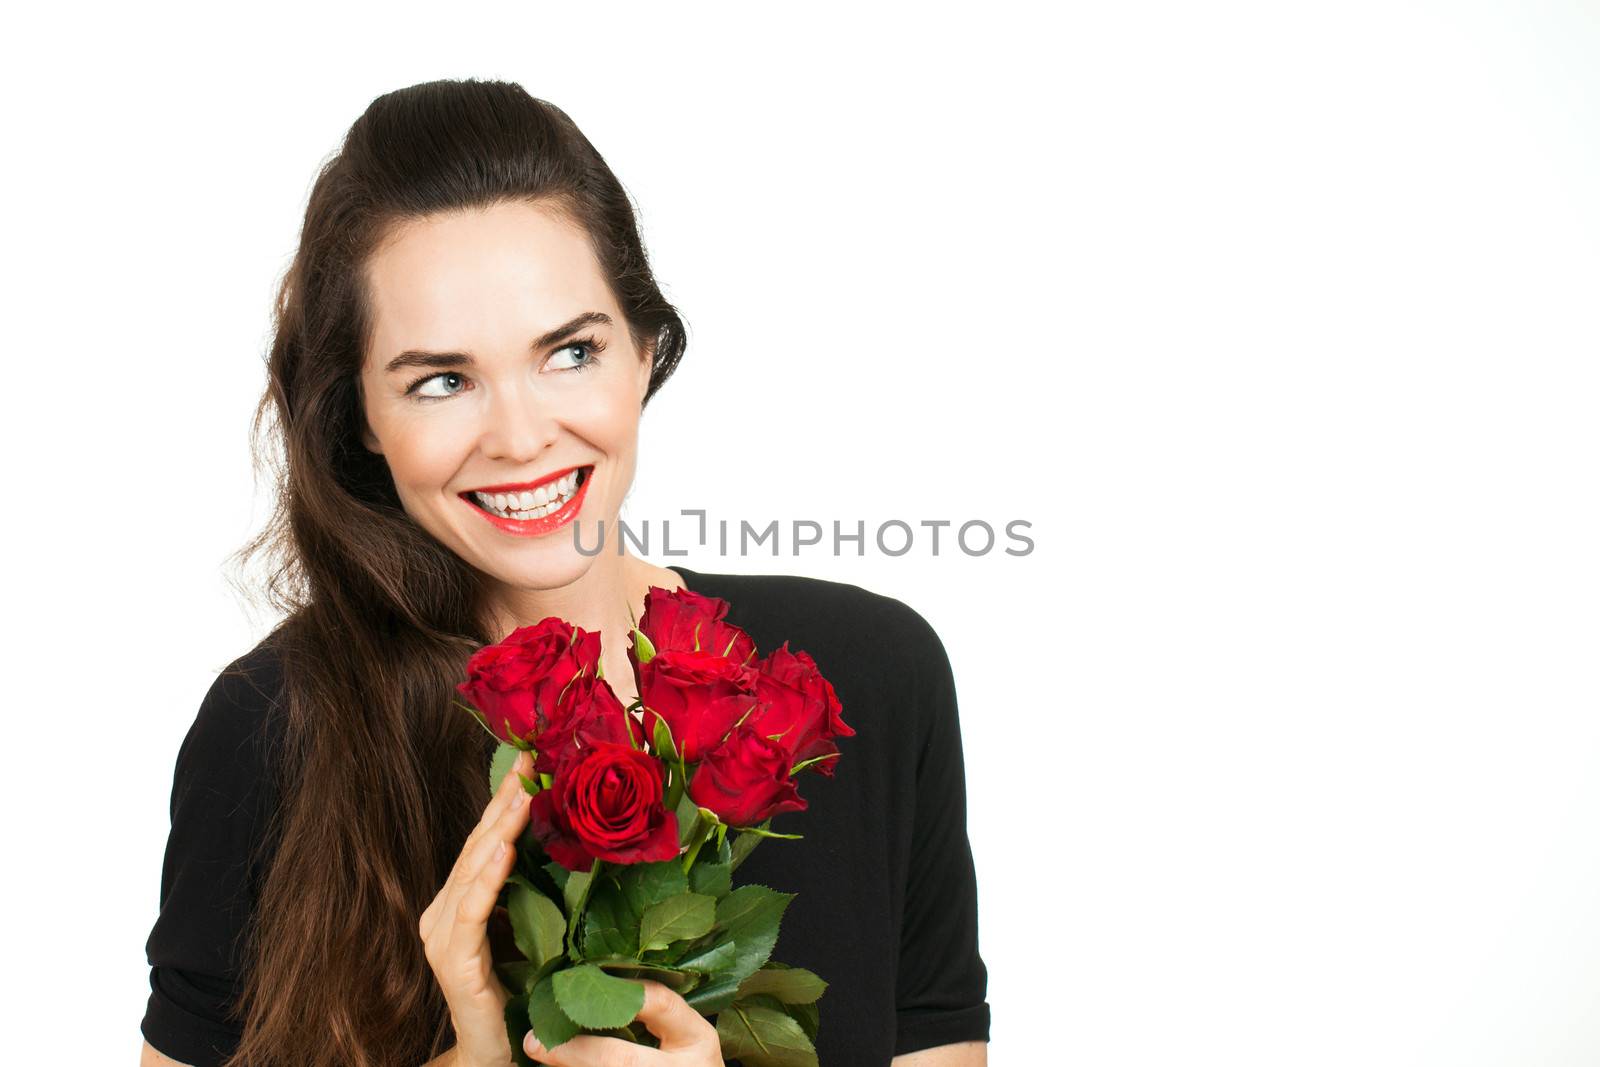 Smiling woman holding roses by Jaykayl